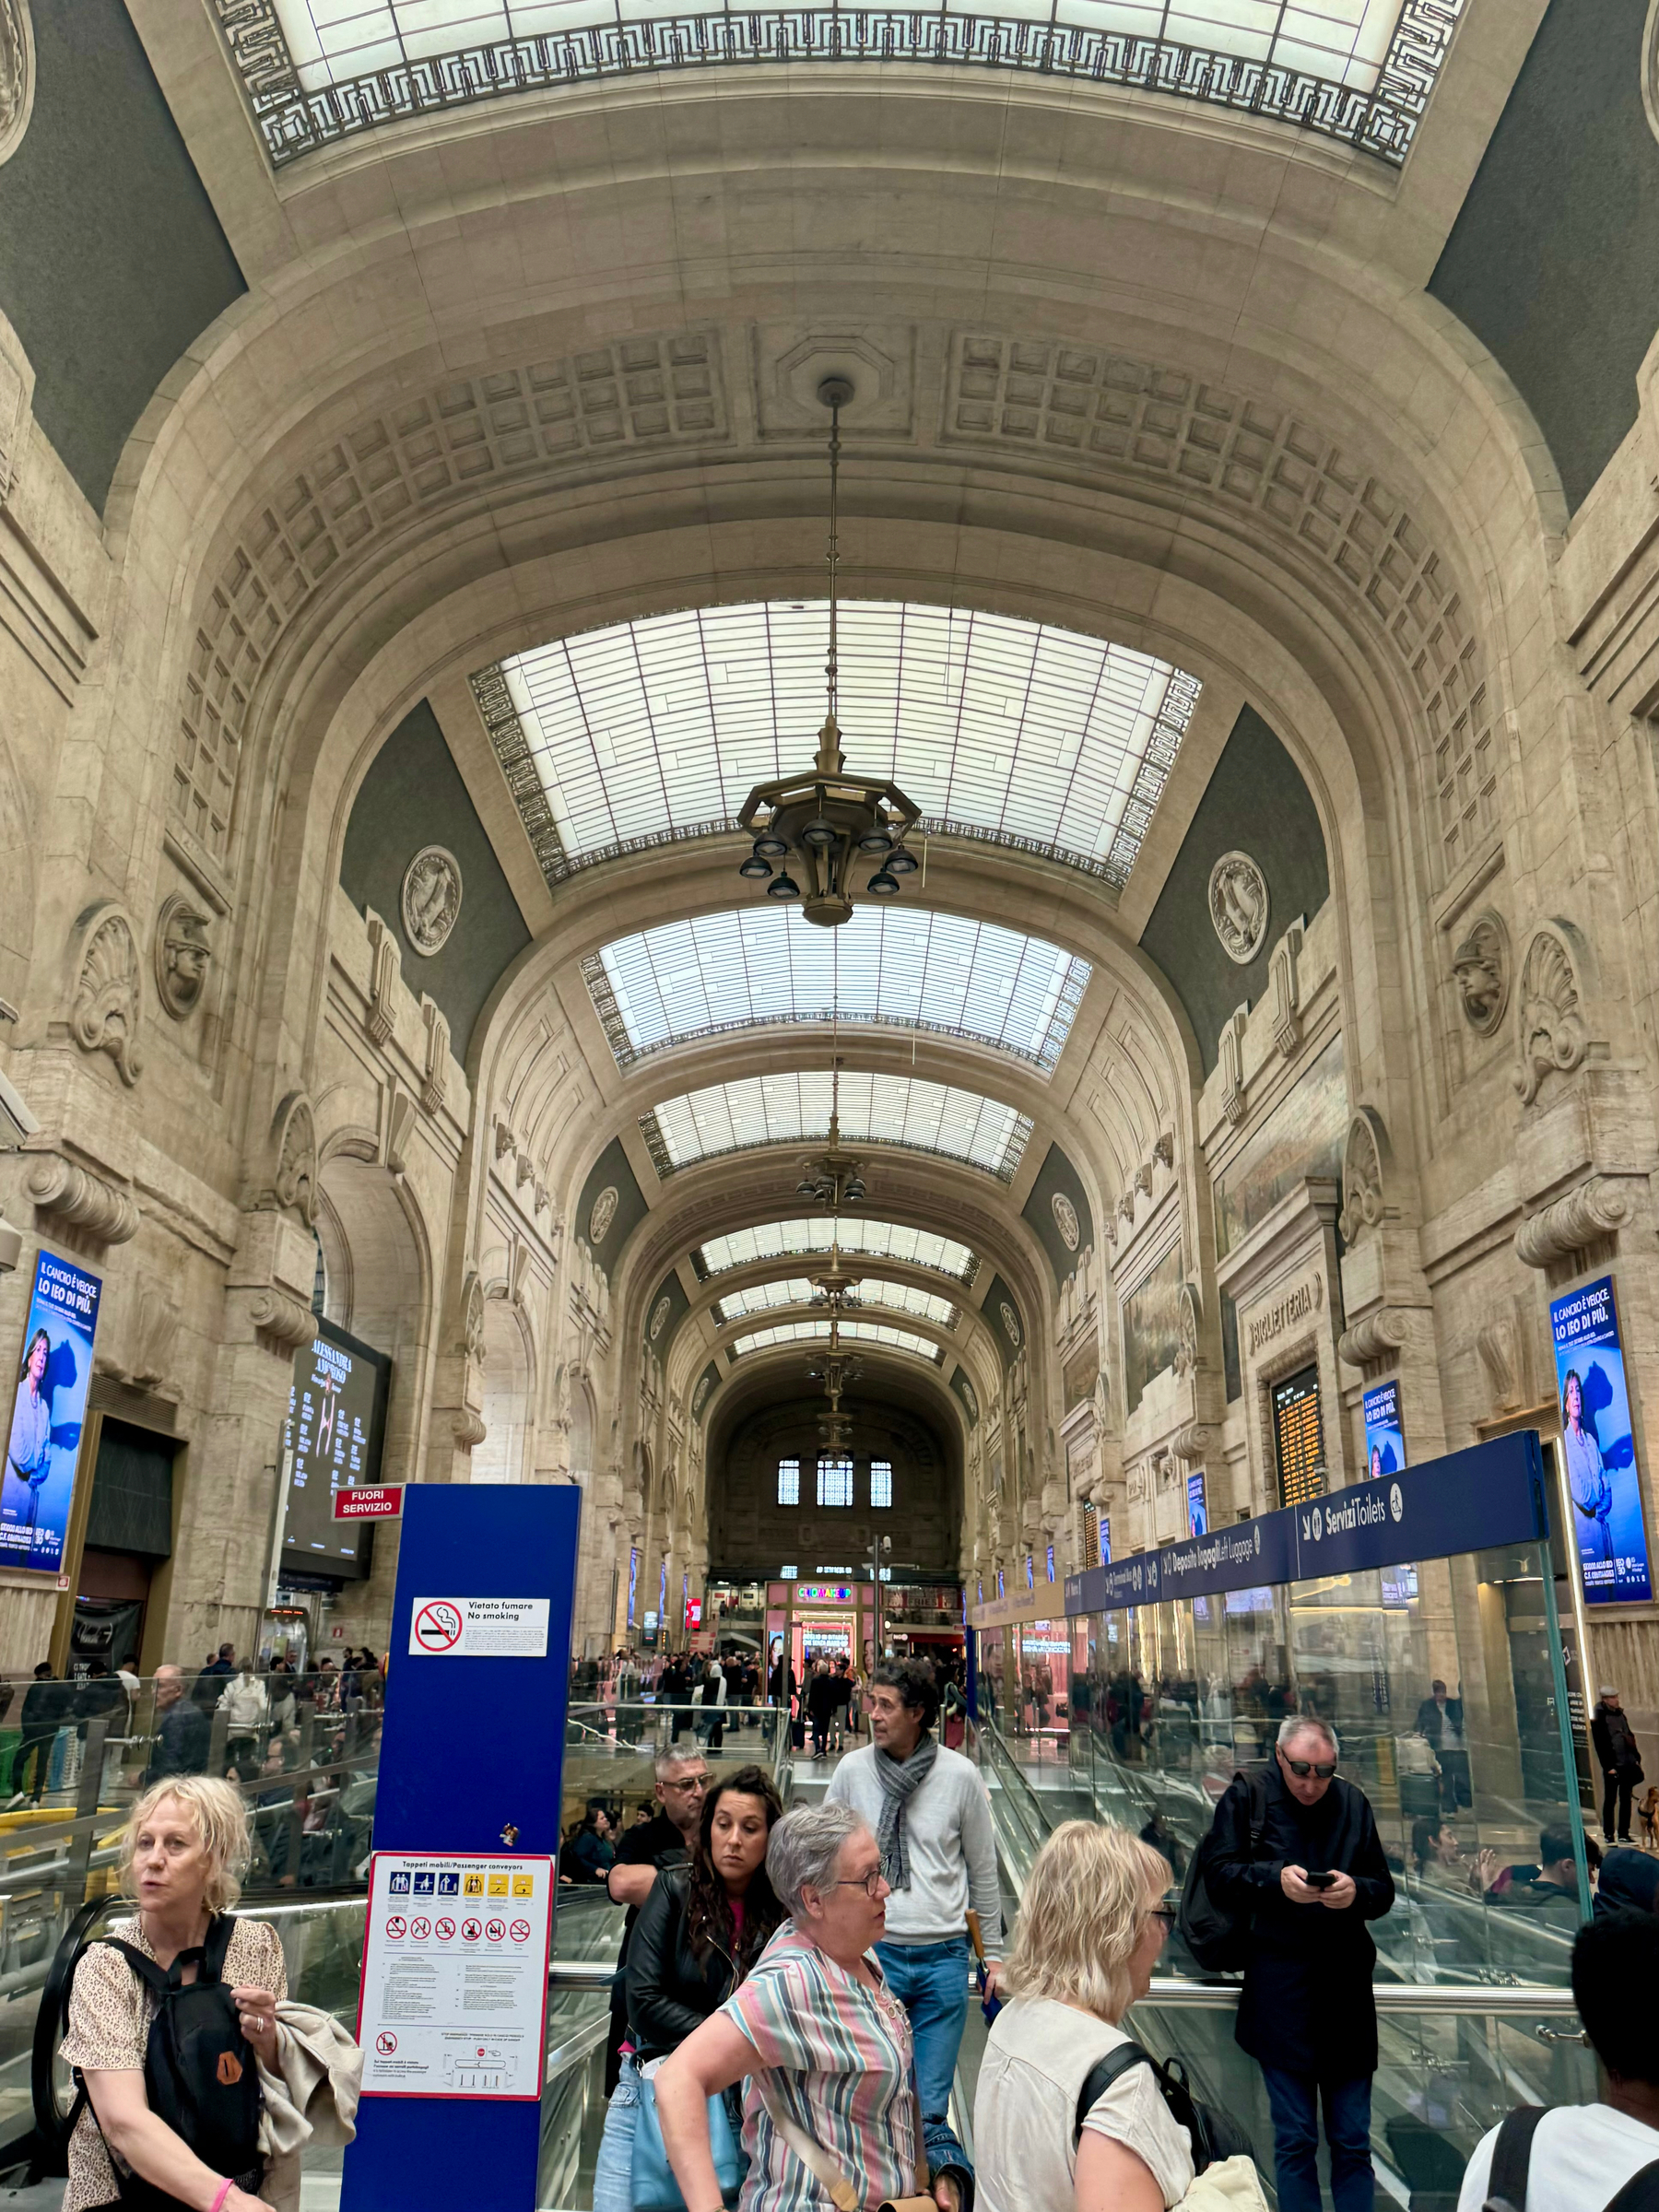 Interior of a grand train station with high arched ceilings, ornate architectural details, and large windows providing natural light. Several people are walking, standing, and using escalators in the busy concourse. Signs with information and advertisements are visible throughout the scene. 